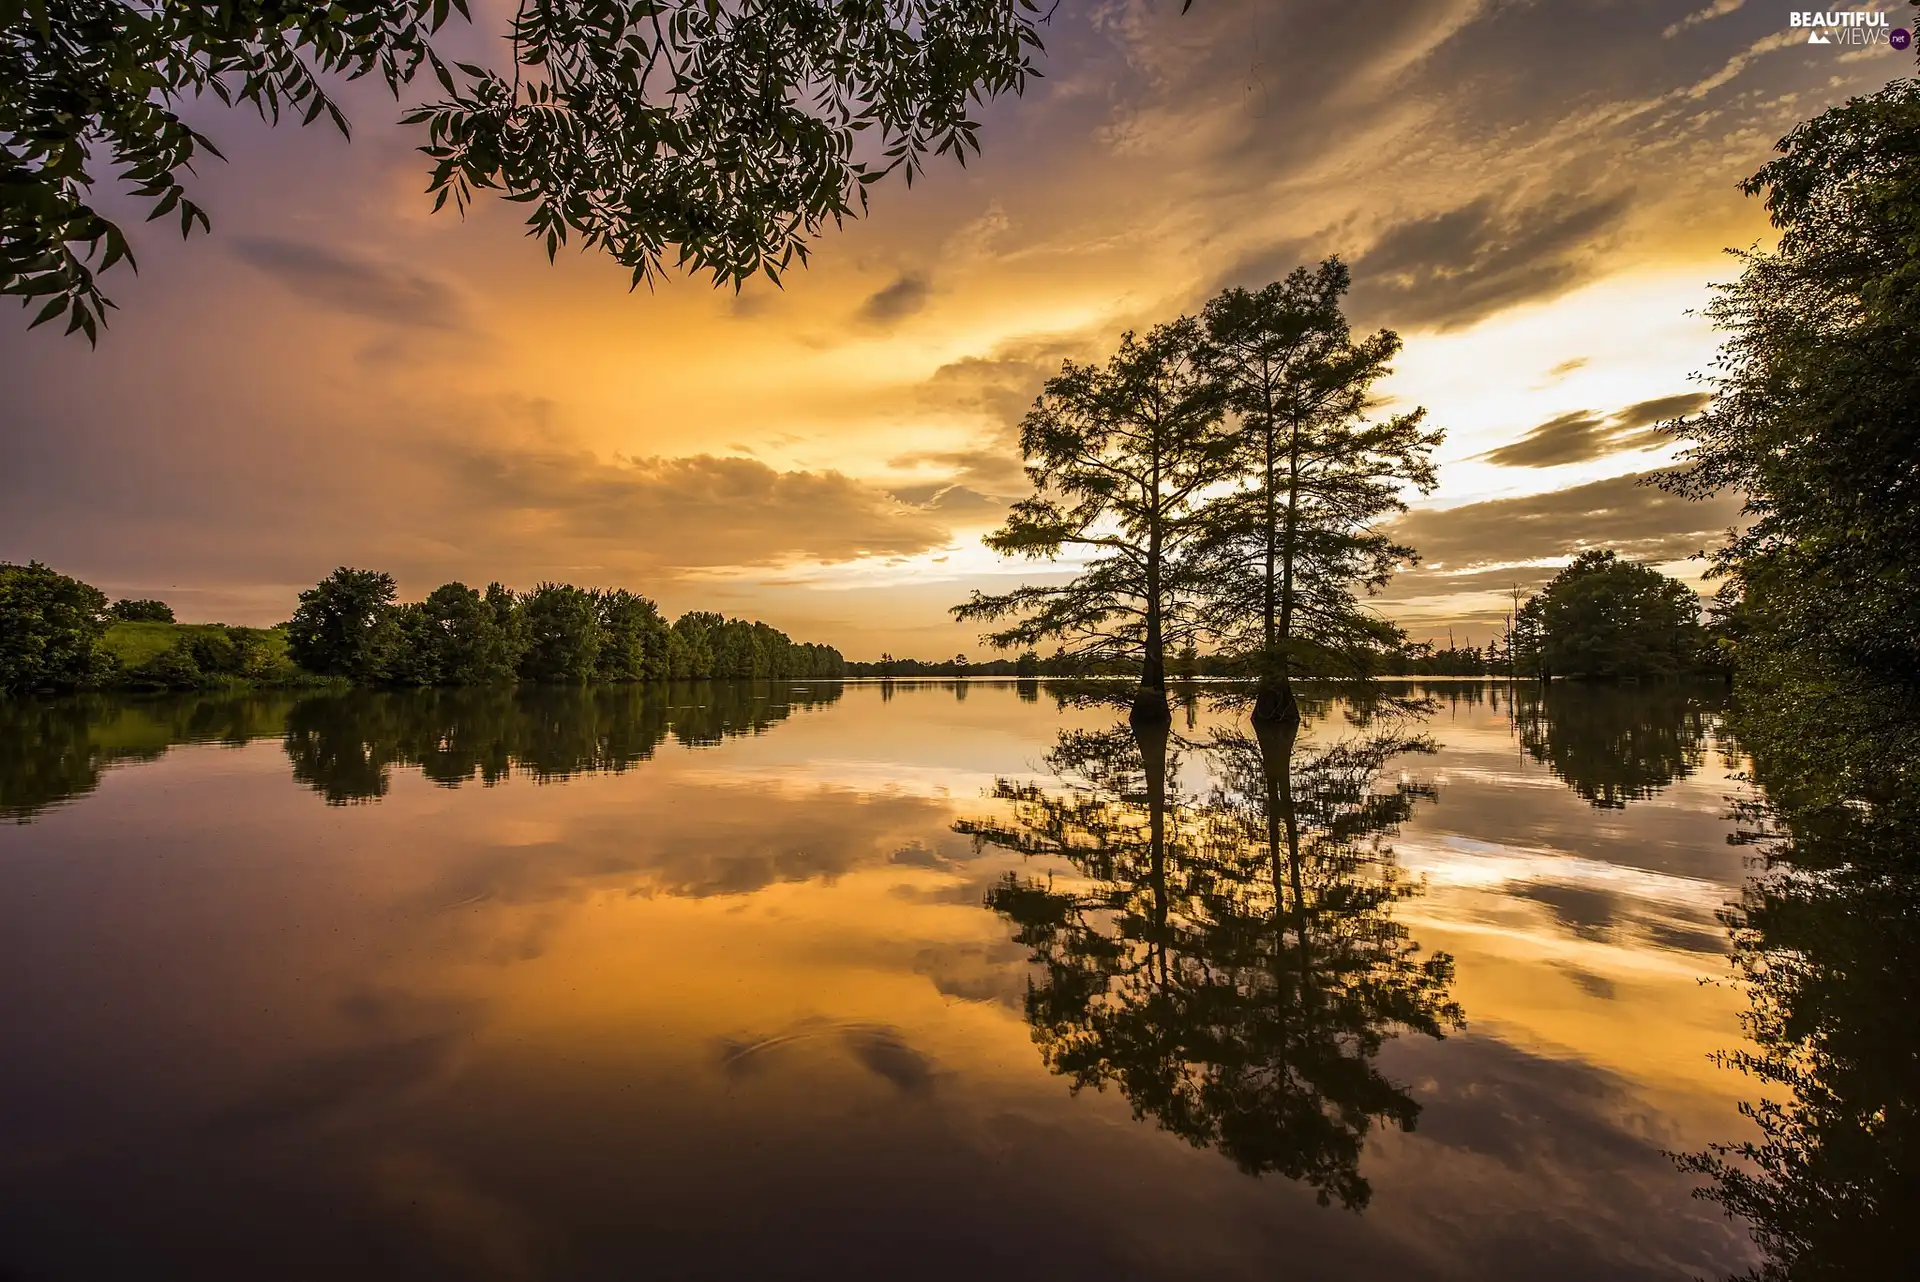 Great Sunsets, Mississippi Delta, viewes, reflection, trees, River